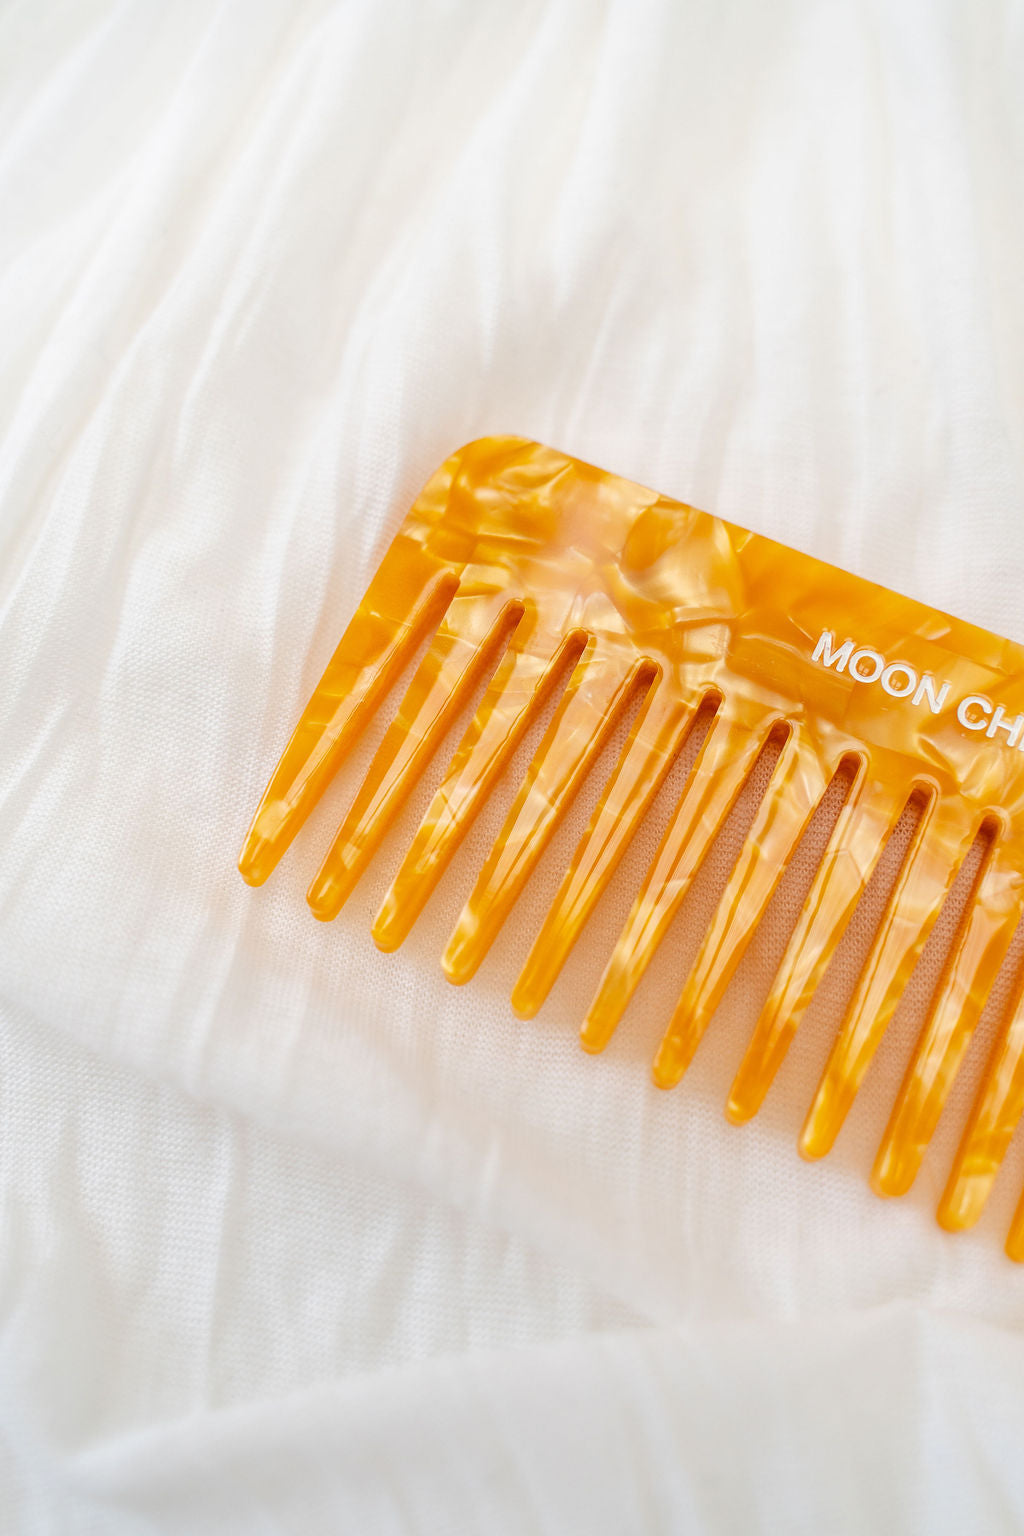 OG Wide tooth curl combs